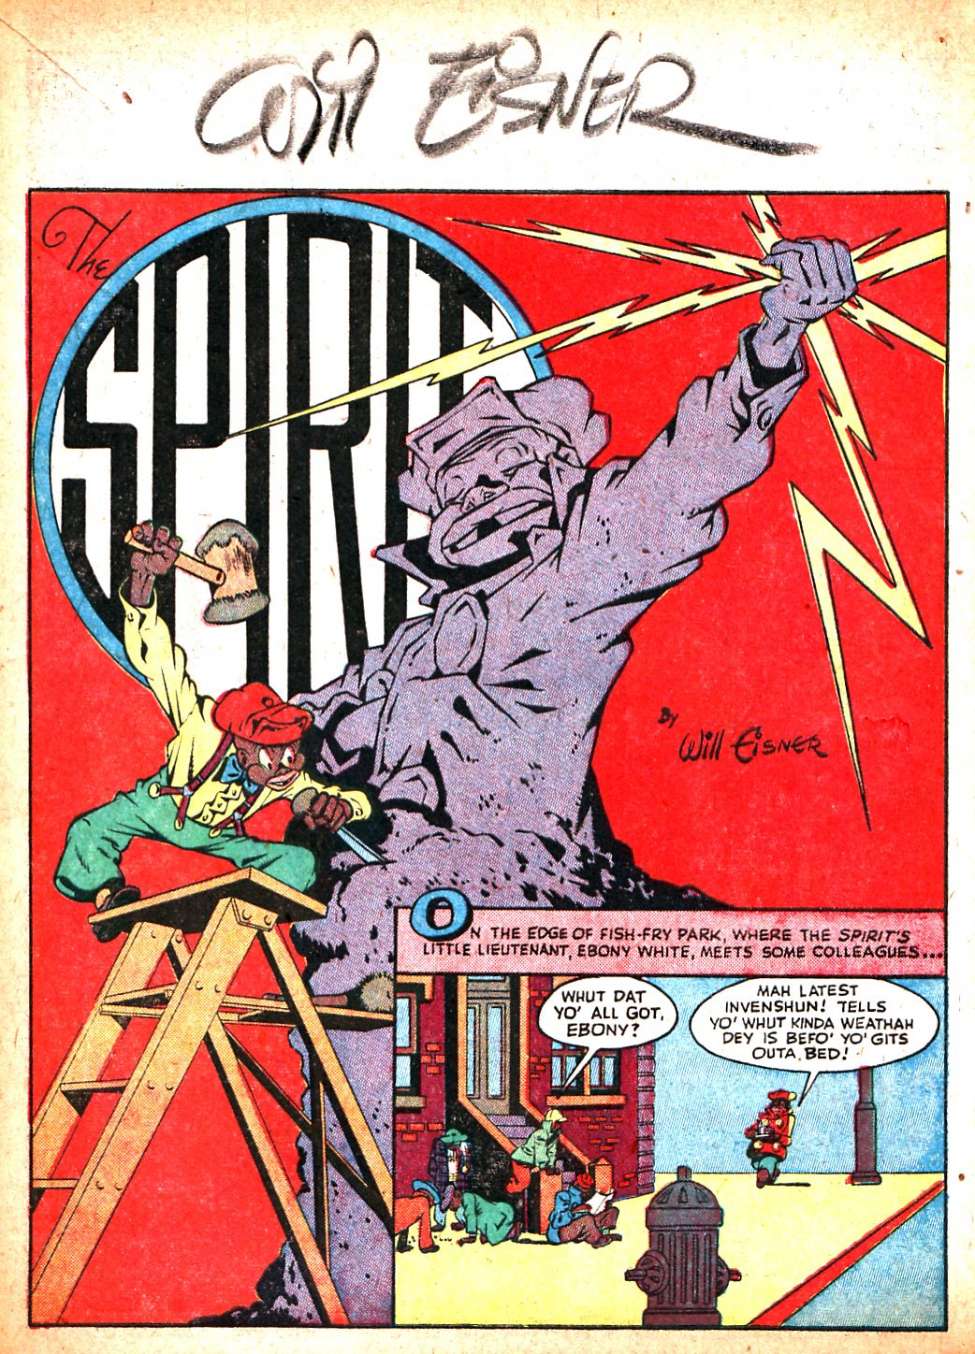 Book Cover For The Spirit (1944-04-23) - Chicago Sun